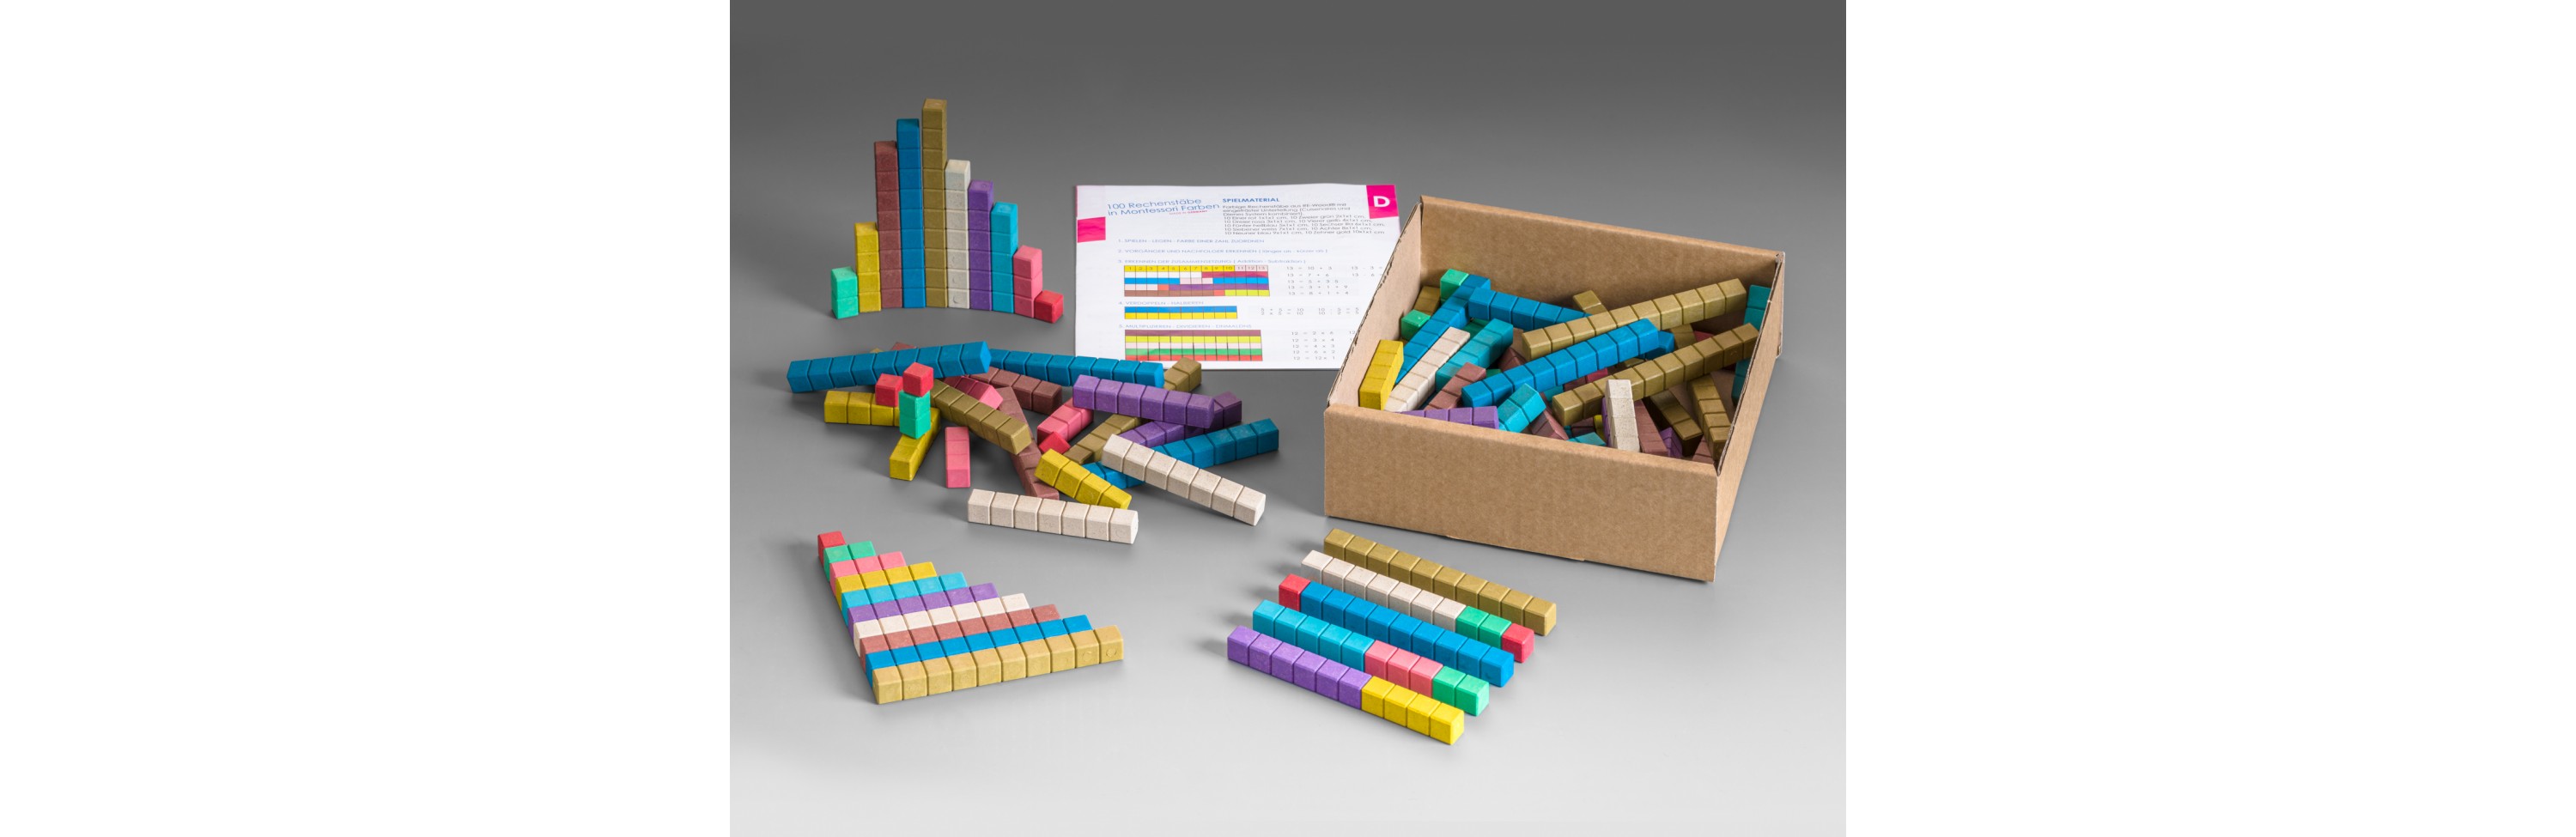 Wissner® active learning - Counting rods in 10 Montessori colours (100 pcs) RE-Wood®